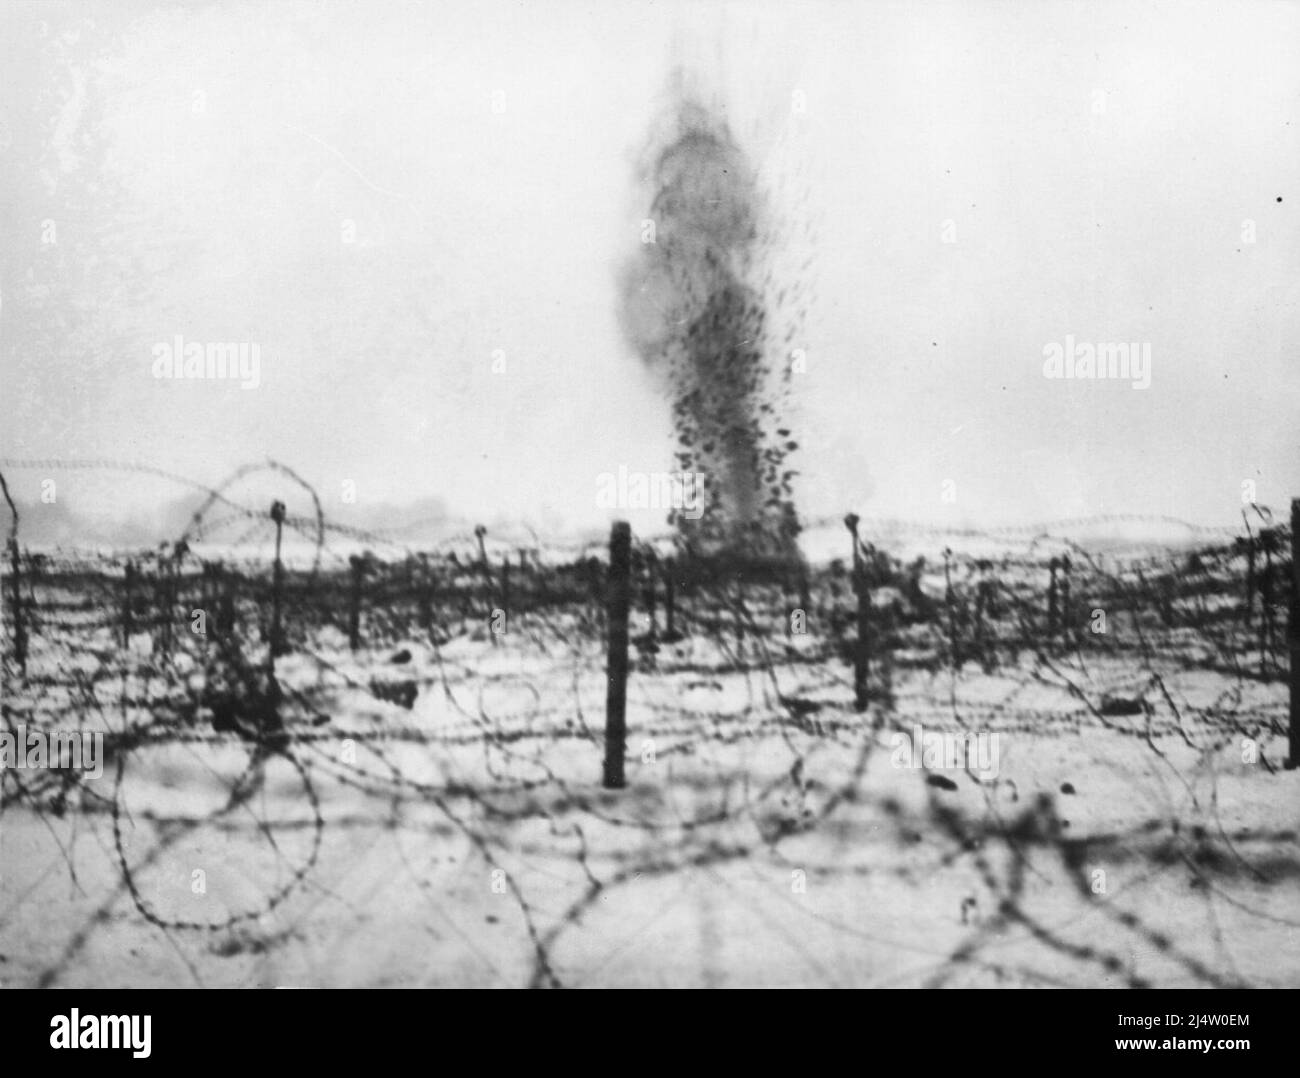 A shell explodong of the front lines of the Western Front during WW1 Stock Photo